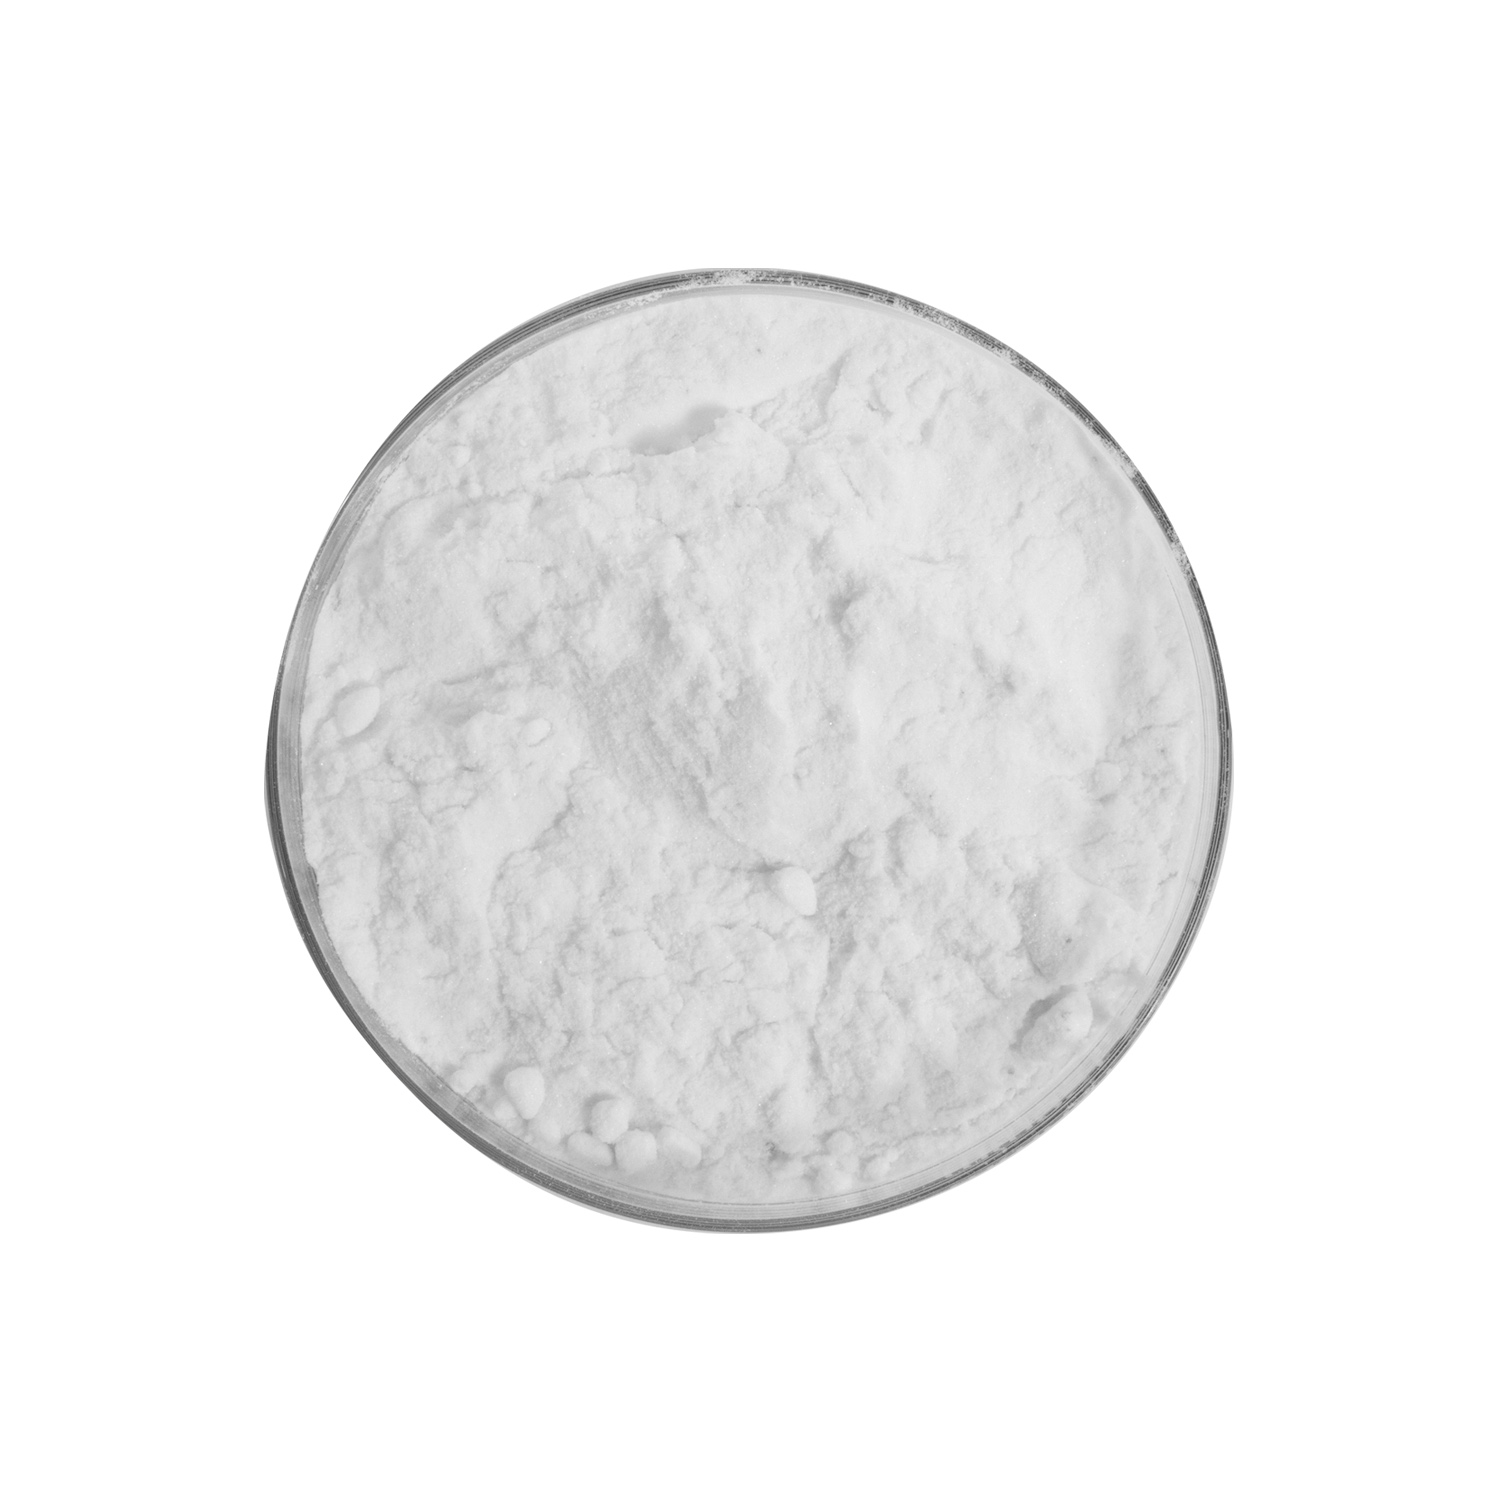 Hot Selling Pharmaceutical Chemical Intermediate Benzocaine HCl CAS 23239-88-5 with Excellent Qualit